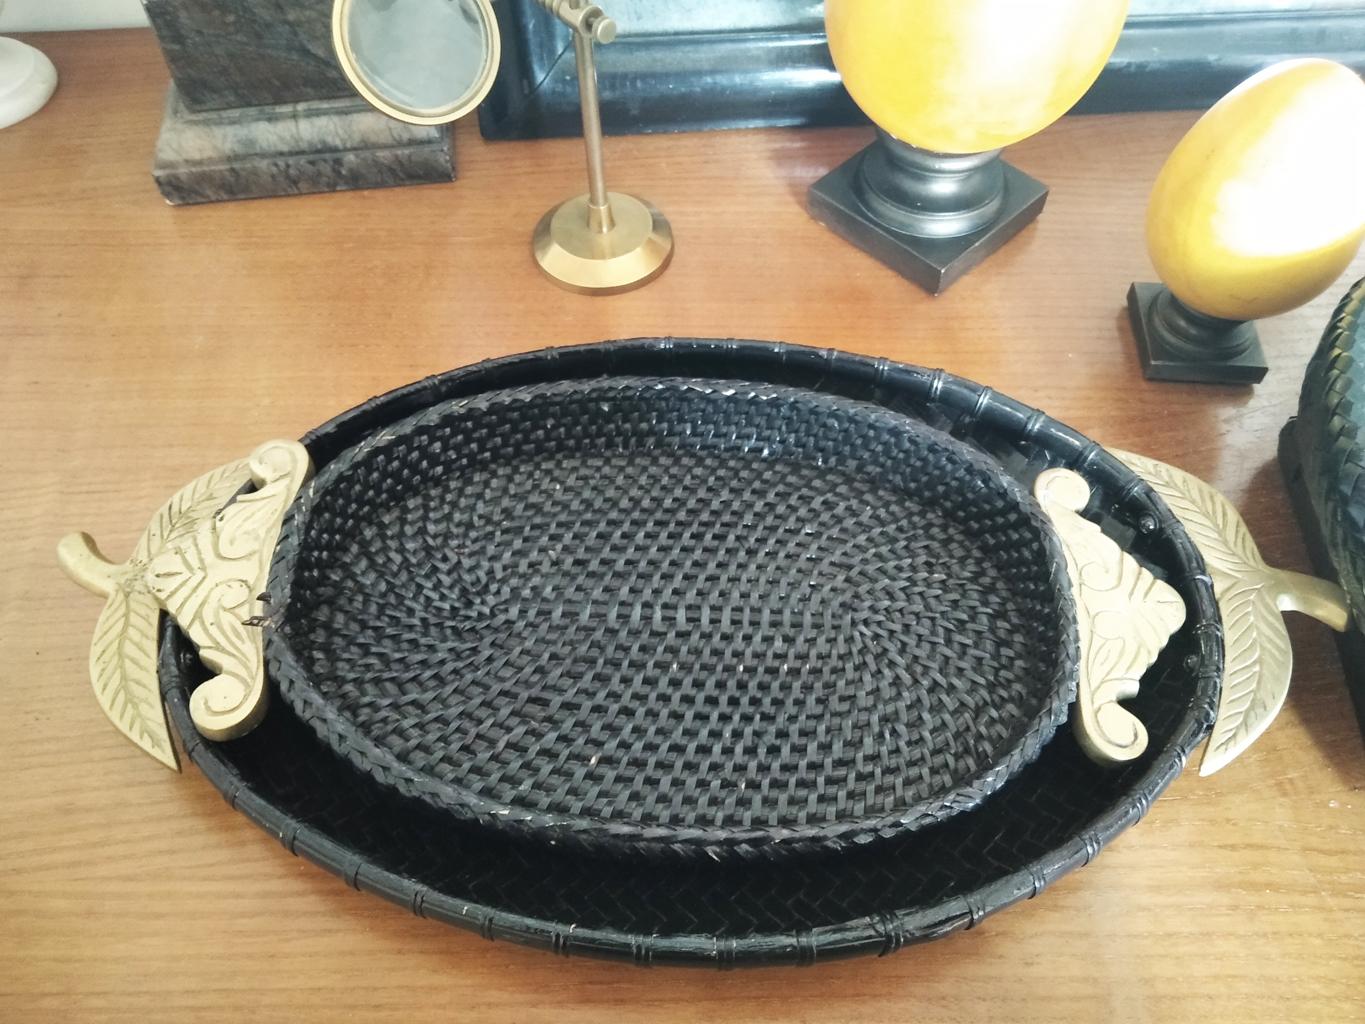 Black rattan trays and brass handles of oriental origin 3 pieces. Mid 20th Century

 The lot of oriental trays of Ratan and Brass consists of two oval trays with side handles and a tray also made of rattan with handles in the form of a bowl or